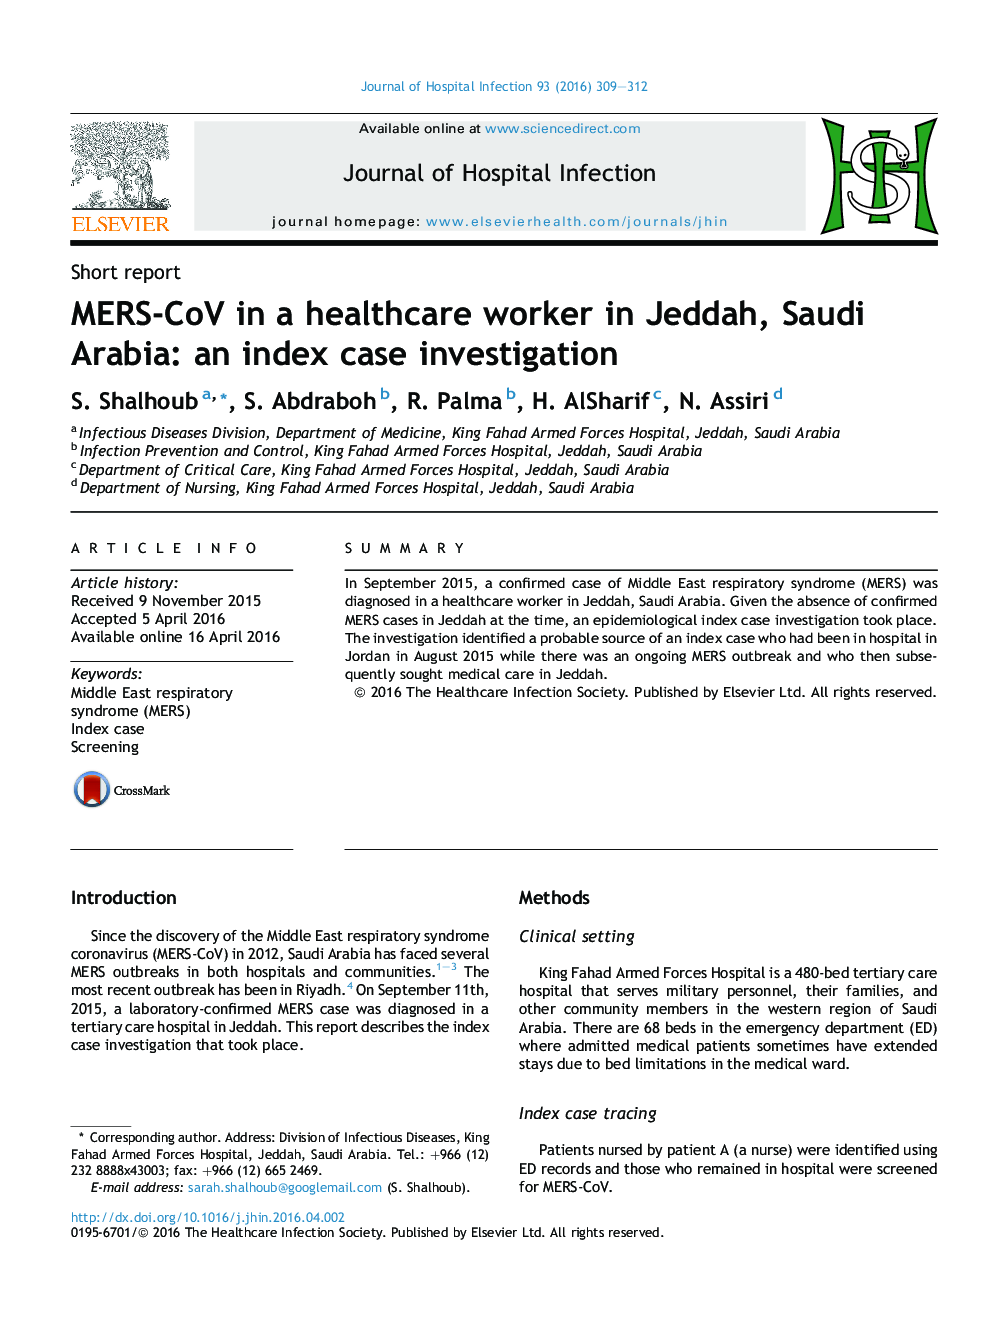 MERS-CoV in a healthcare worker in Jeddah, Saudi Arabia: an index case investigation